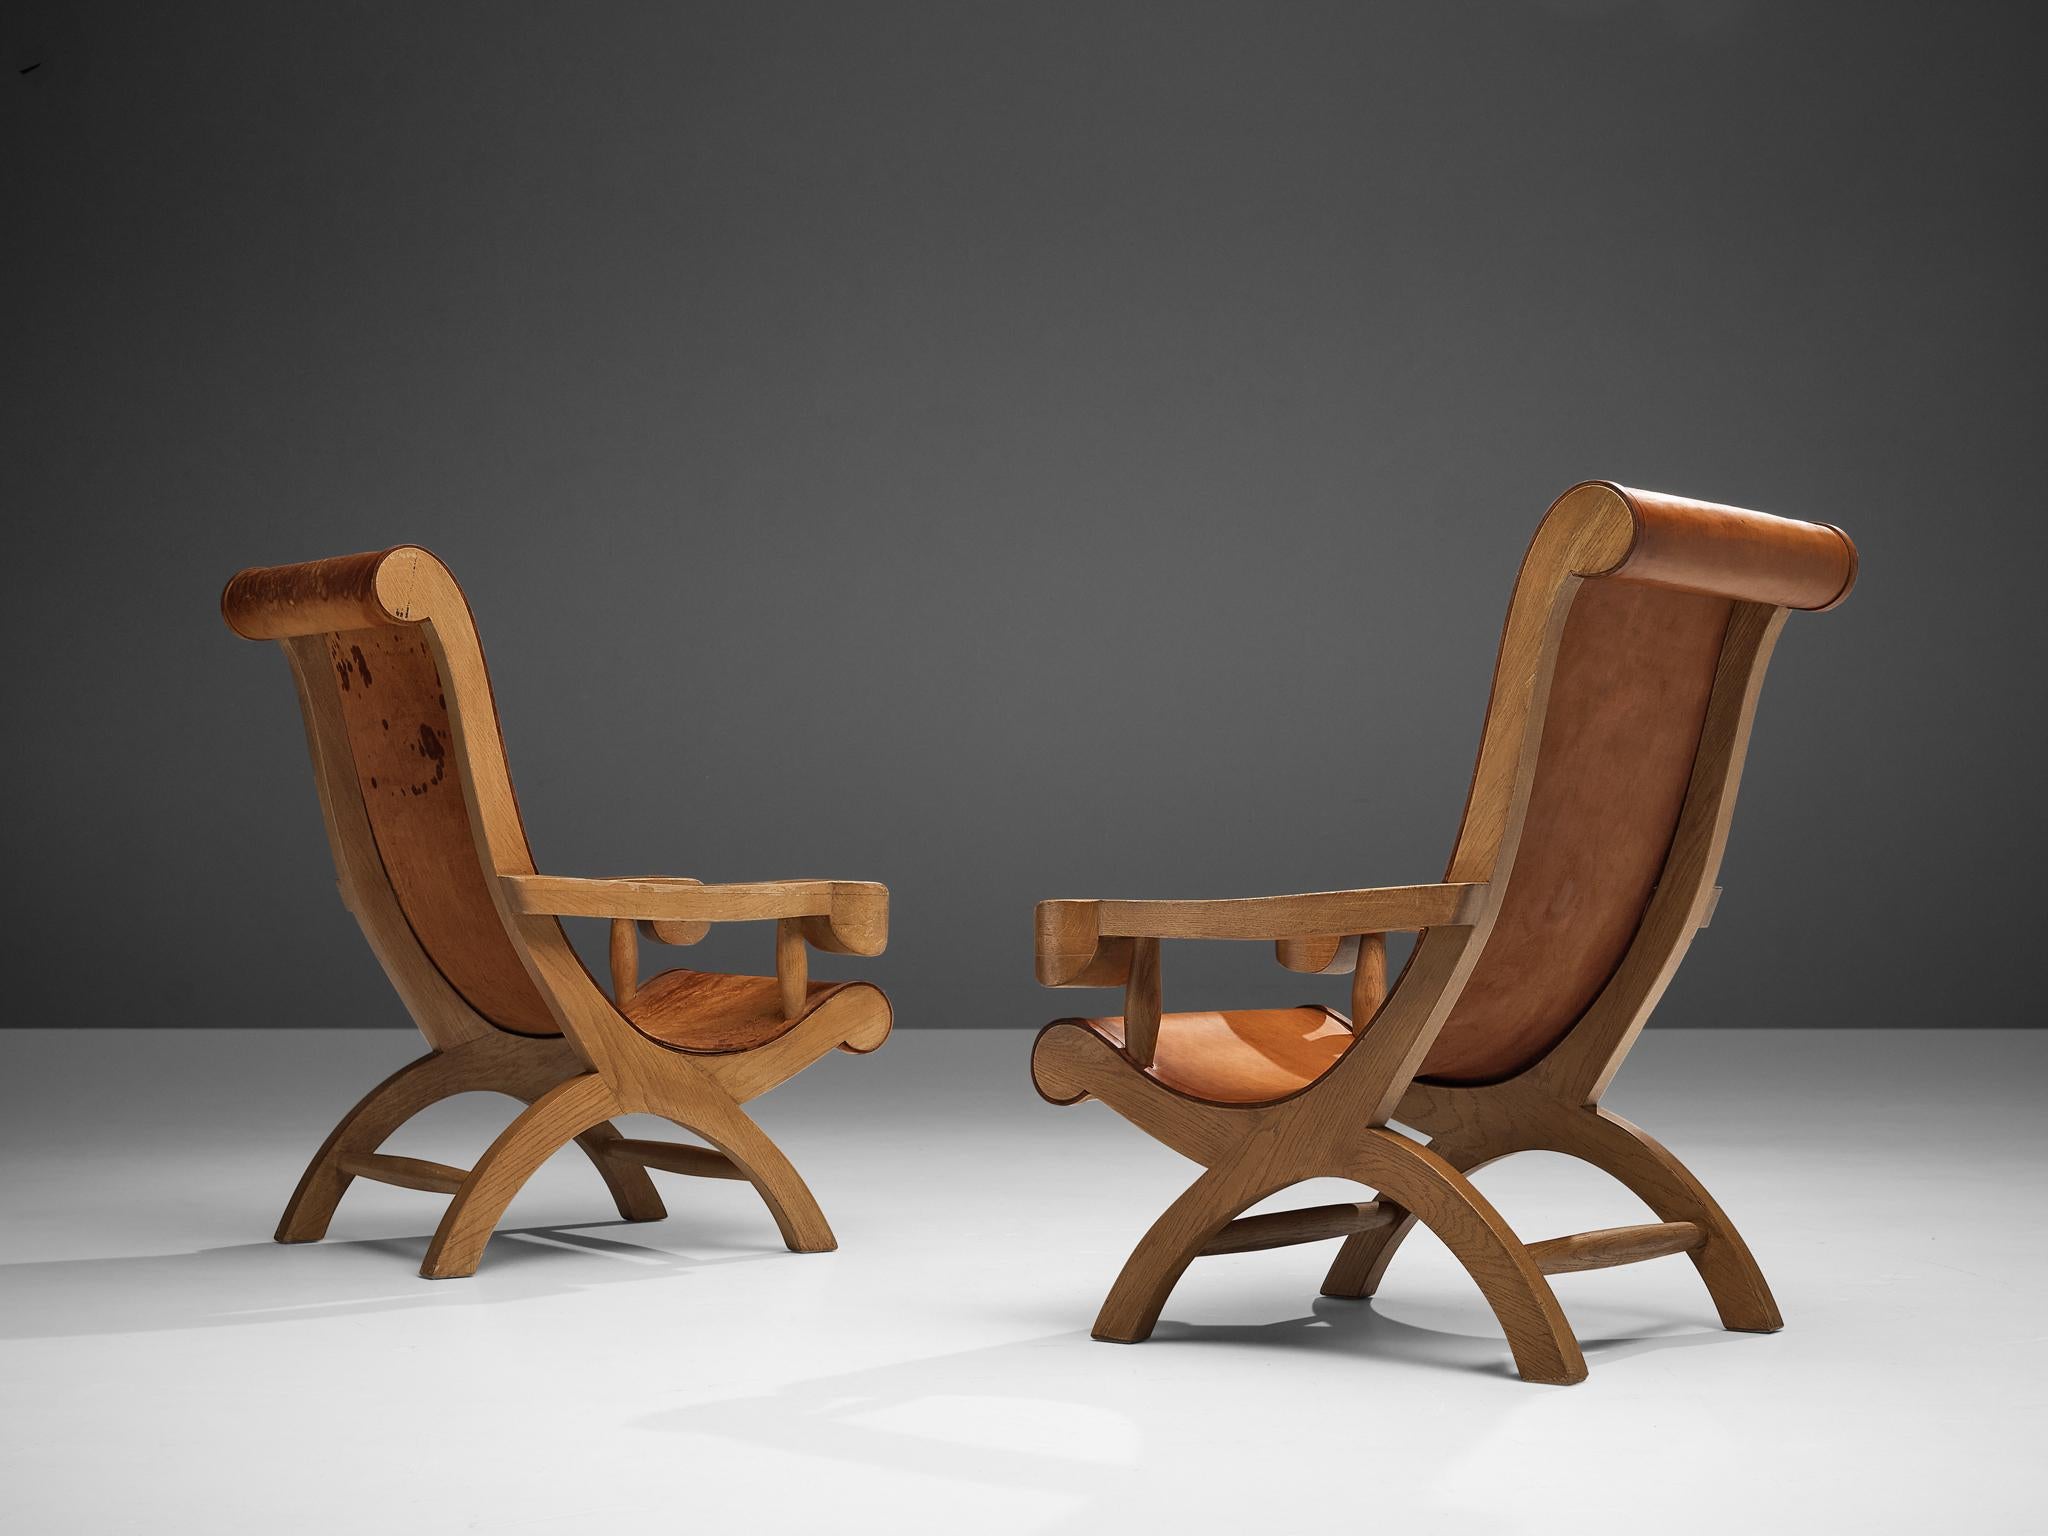 Mexican Clara Porset Lounge Chairs 'Butaque' in Original Patinated Leather For Sale